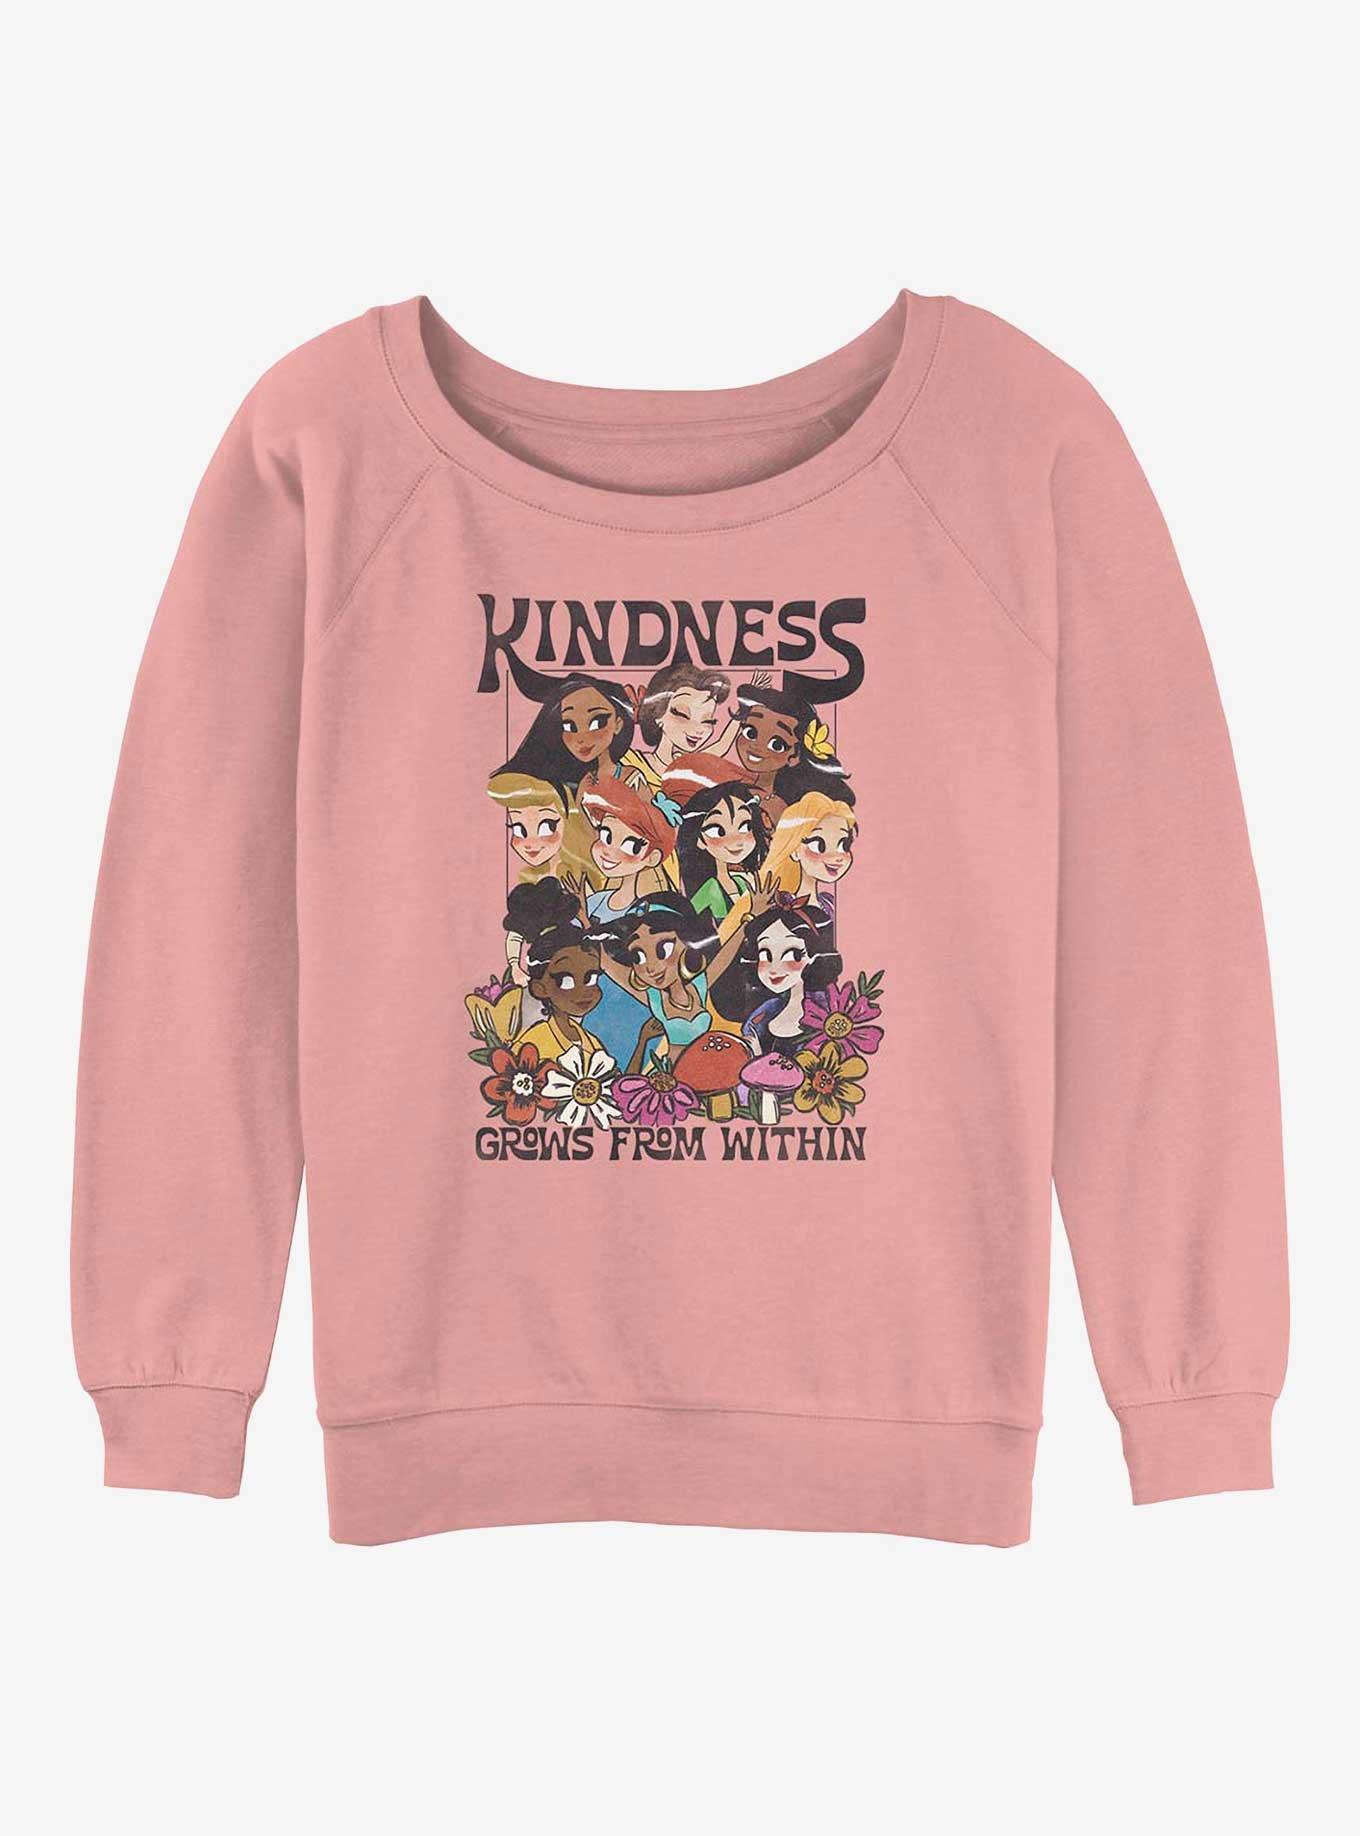 Disney Pocahontas Kindness Grows From Within Girls Slouchy Sweatshirt, DESERTPNK, hi-res